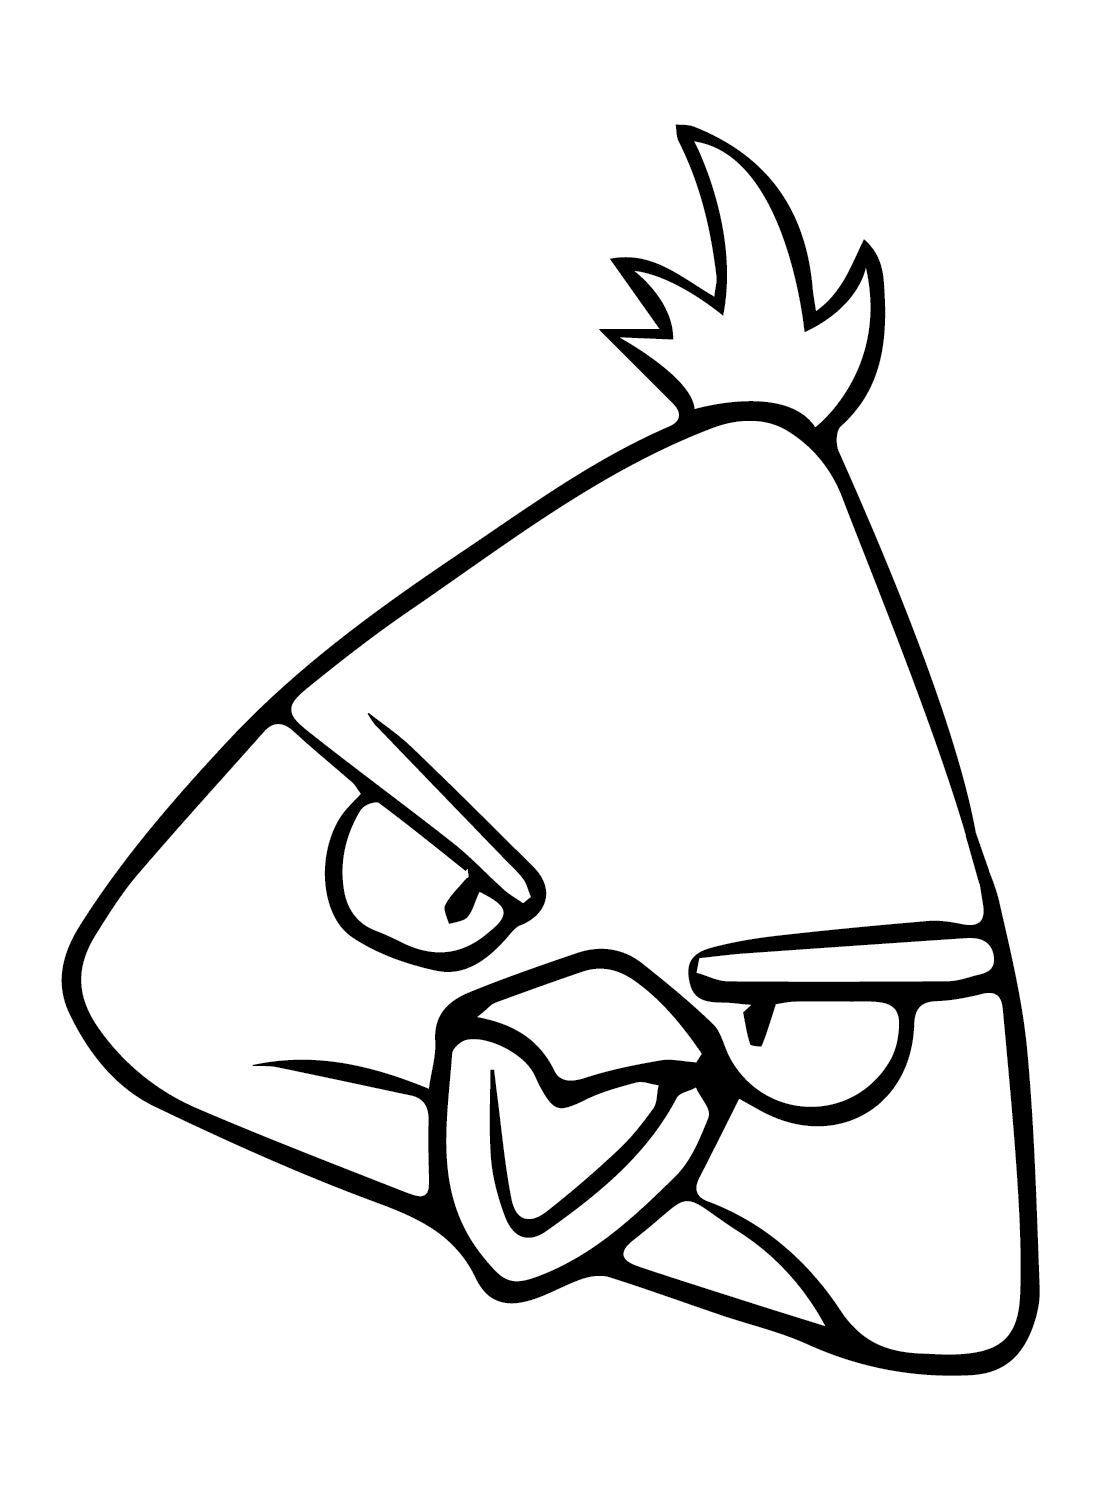 Drawing Chuck (Angry Bird) Coloring Page